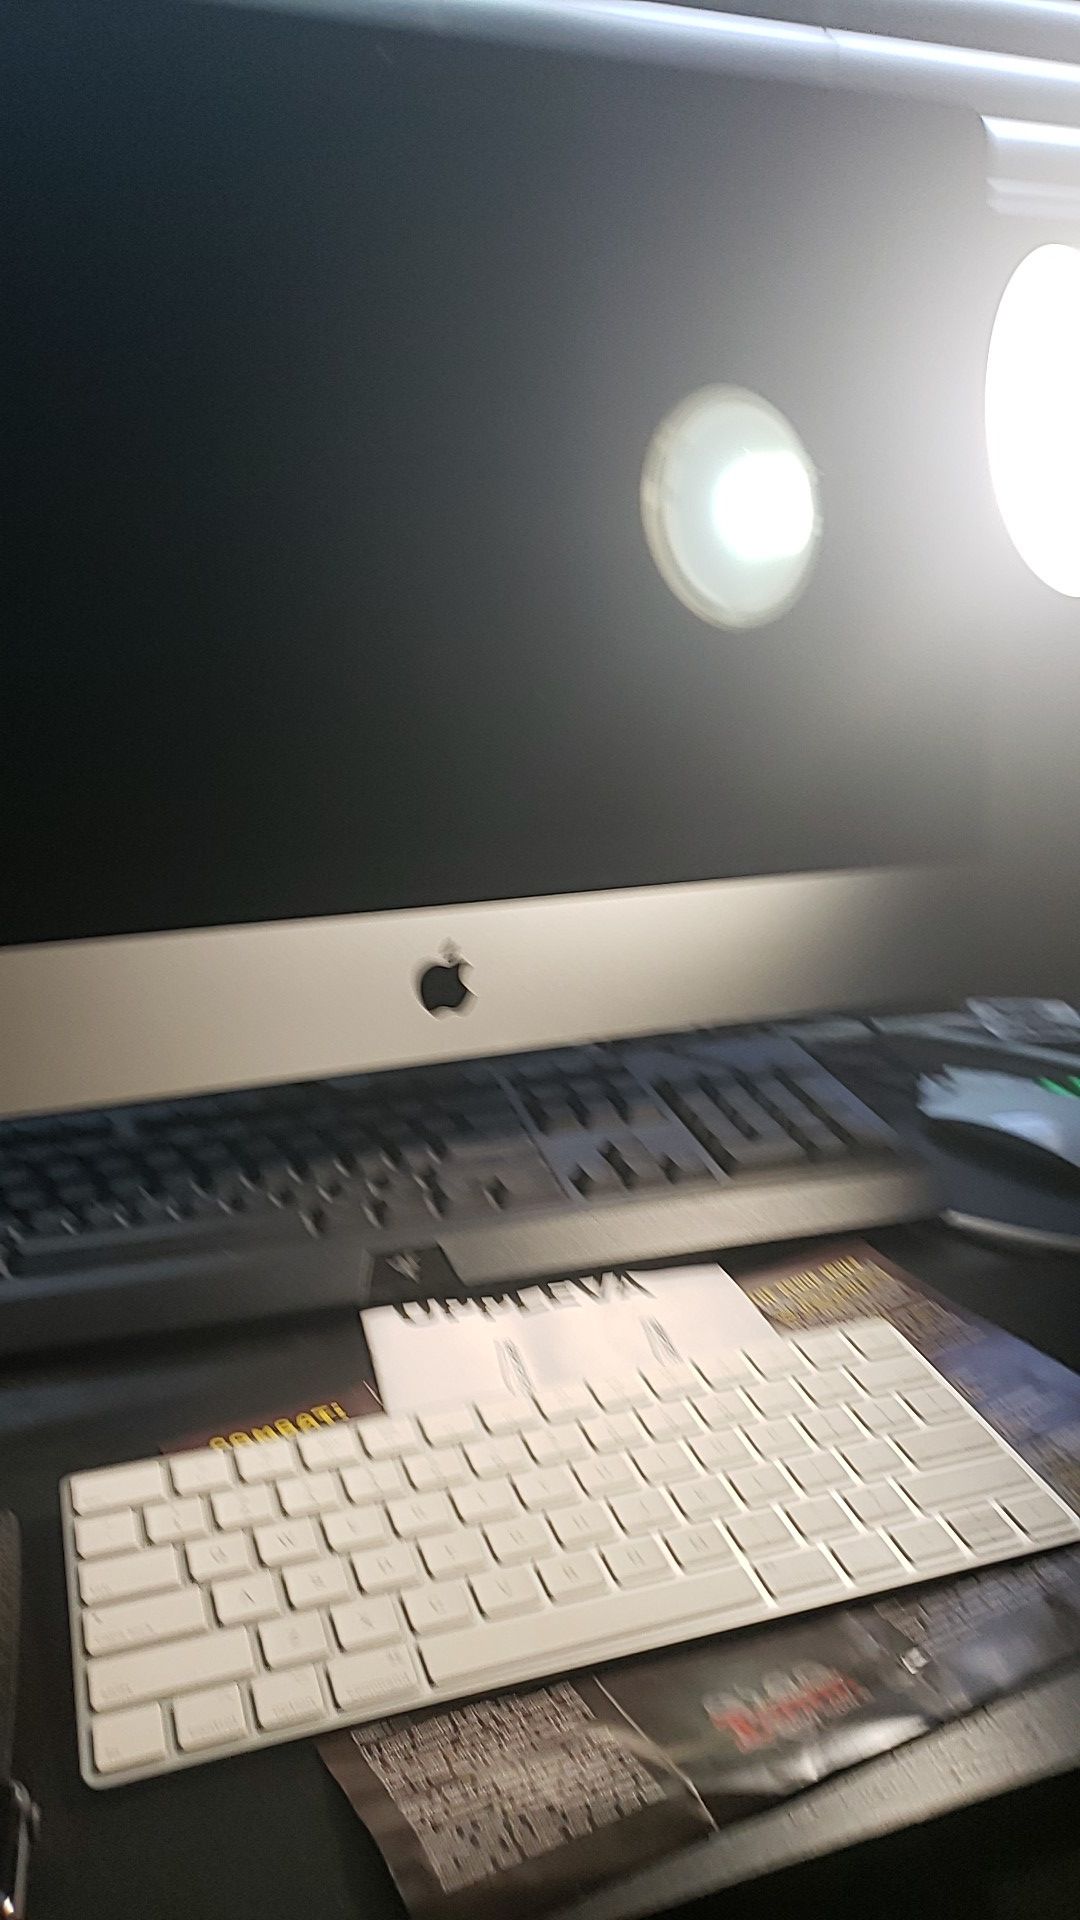 IMac for sale with keyboard and Mouse!